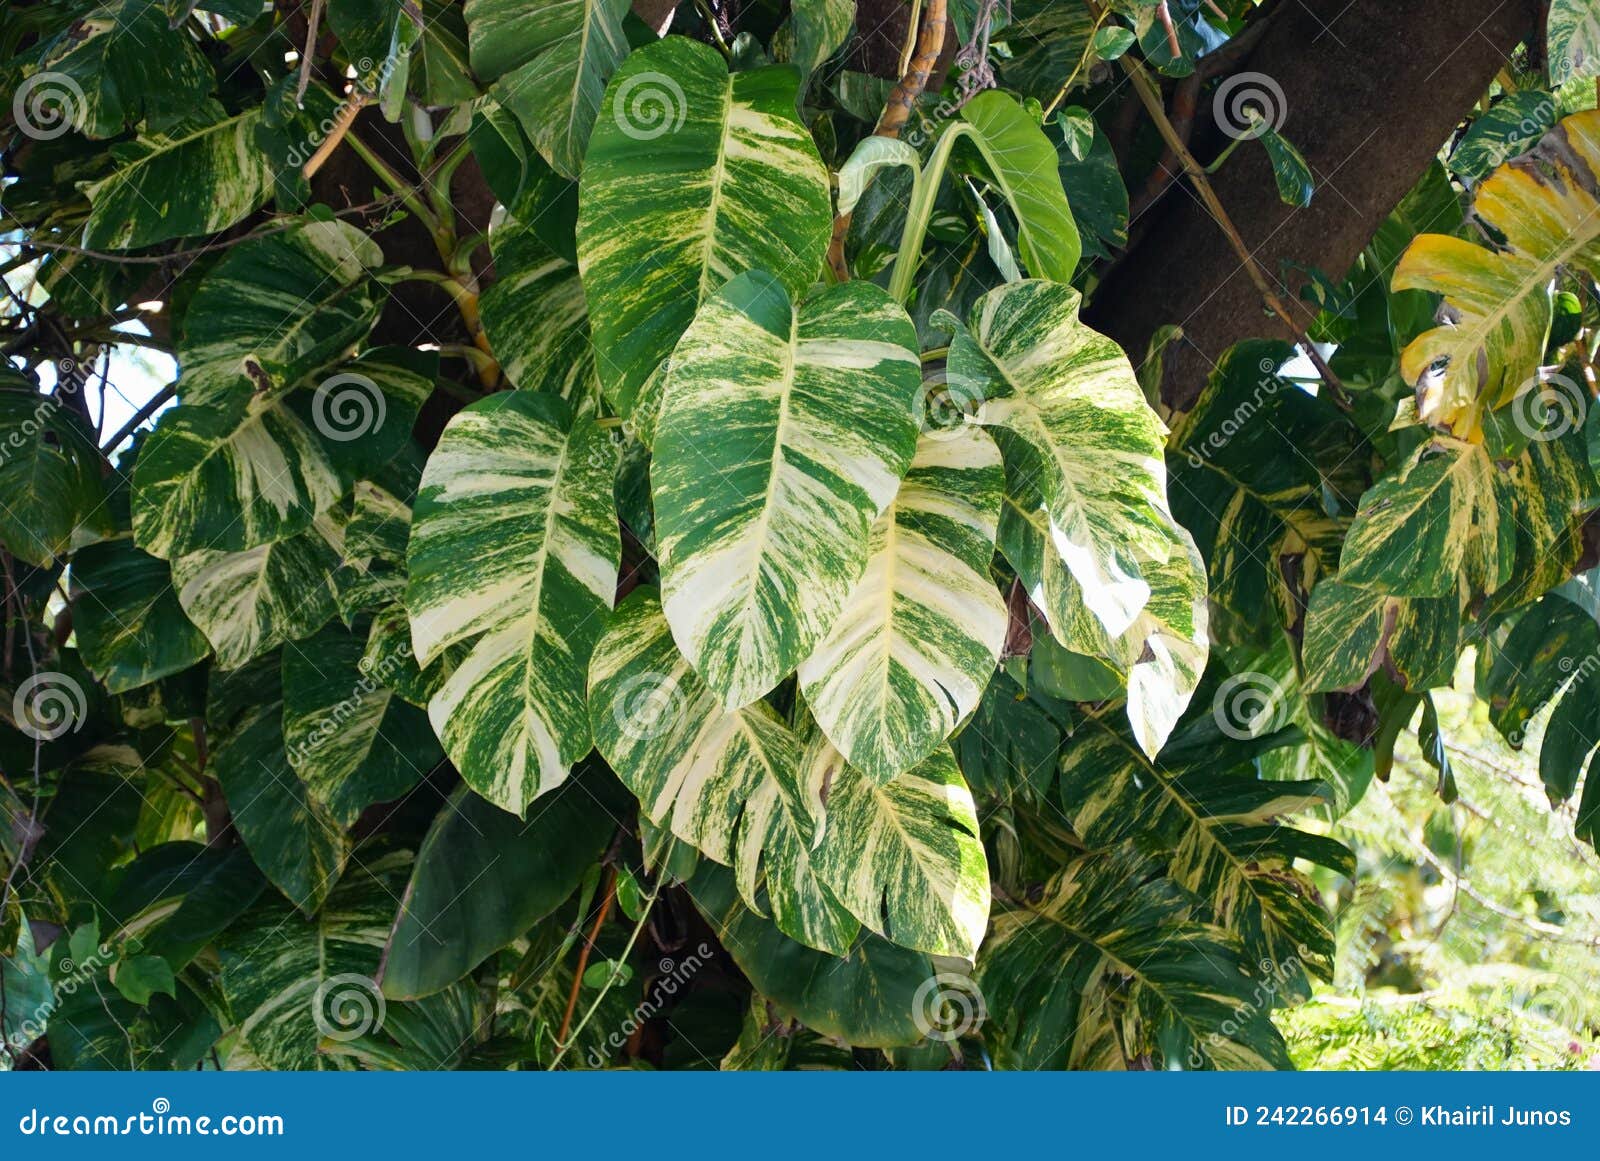 beautiful variegated leaves of giant hawaiian pothos climbing on top of a tree